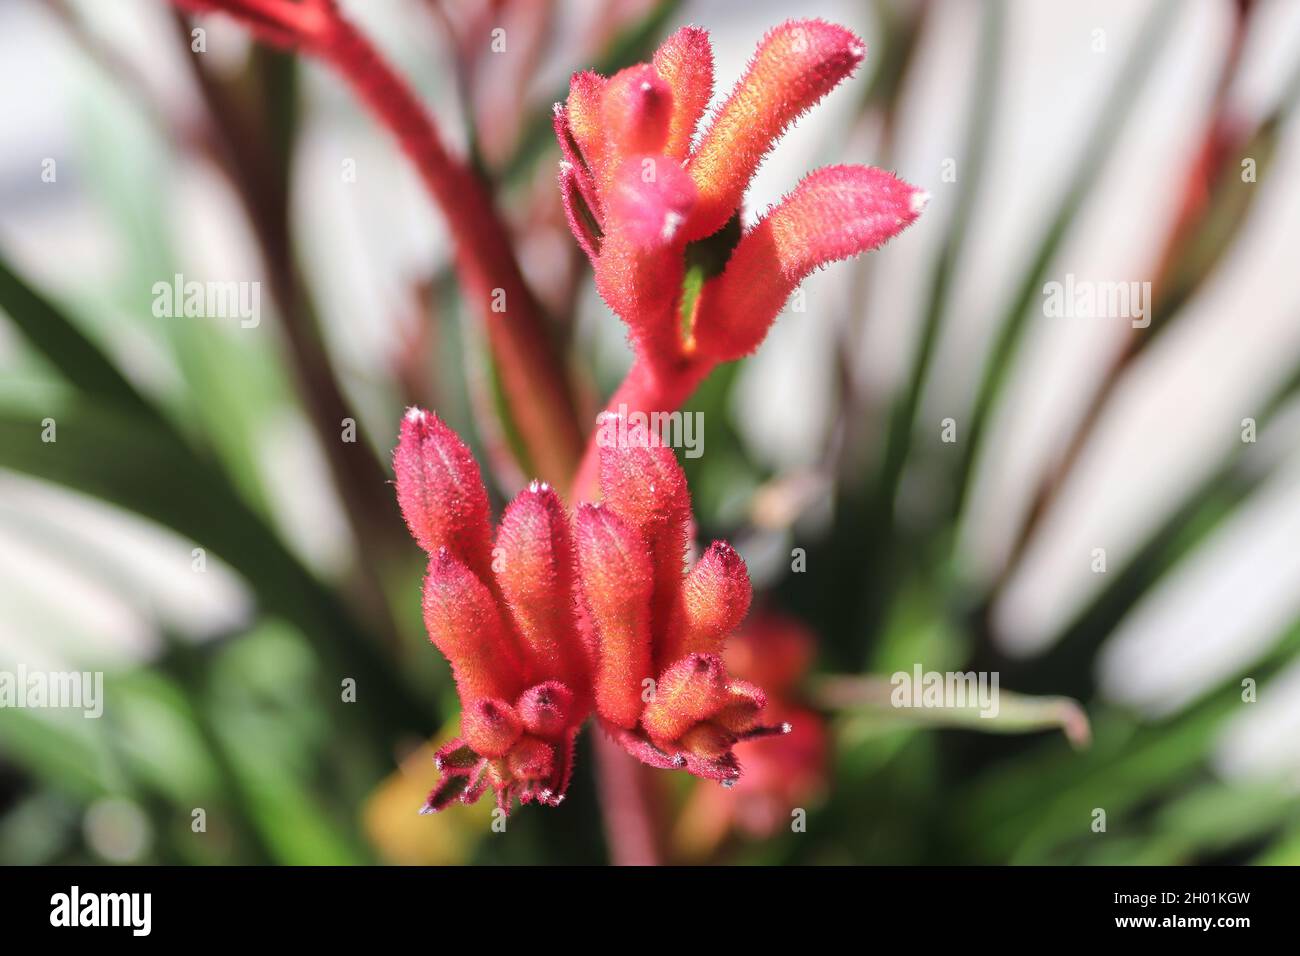 Red flower petals on a Kangaroo Paw plant Stock Photo